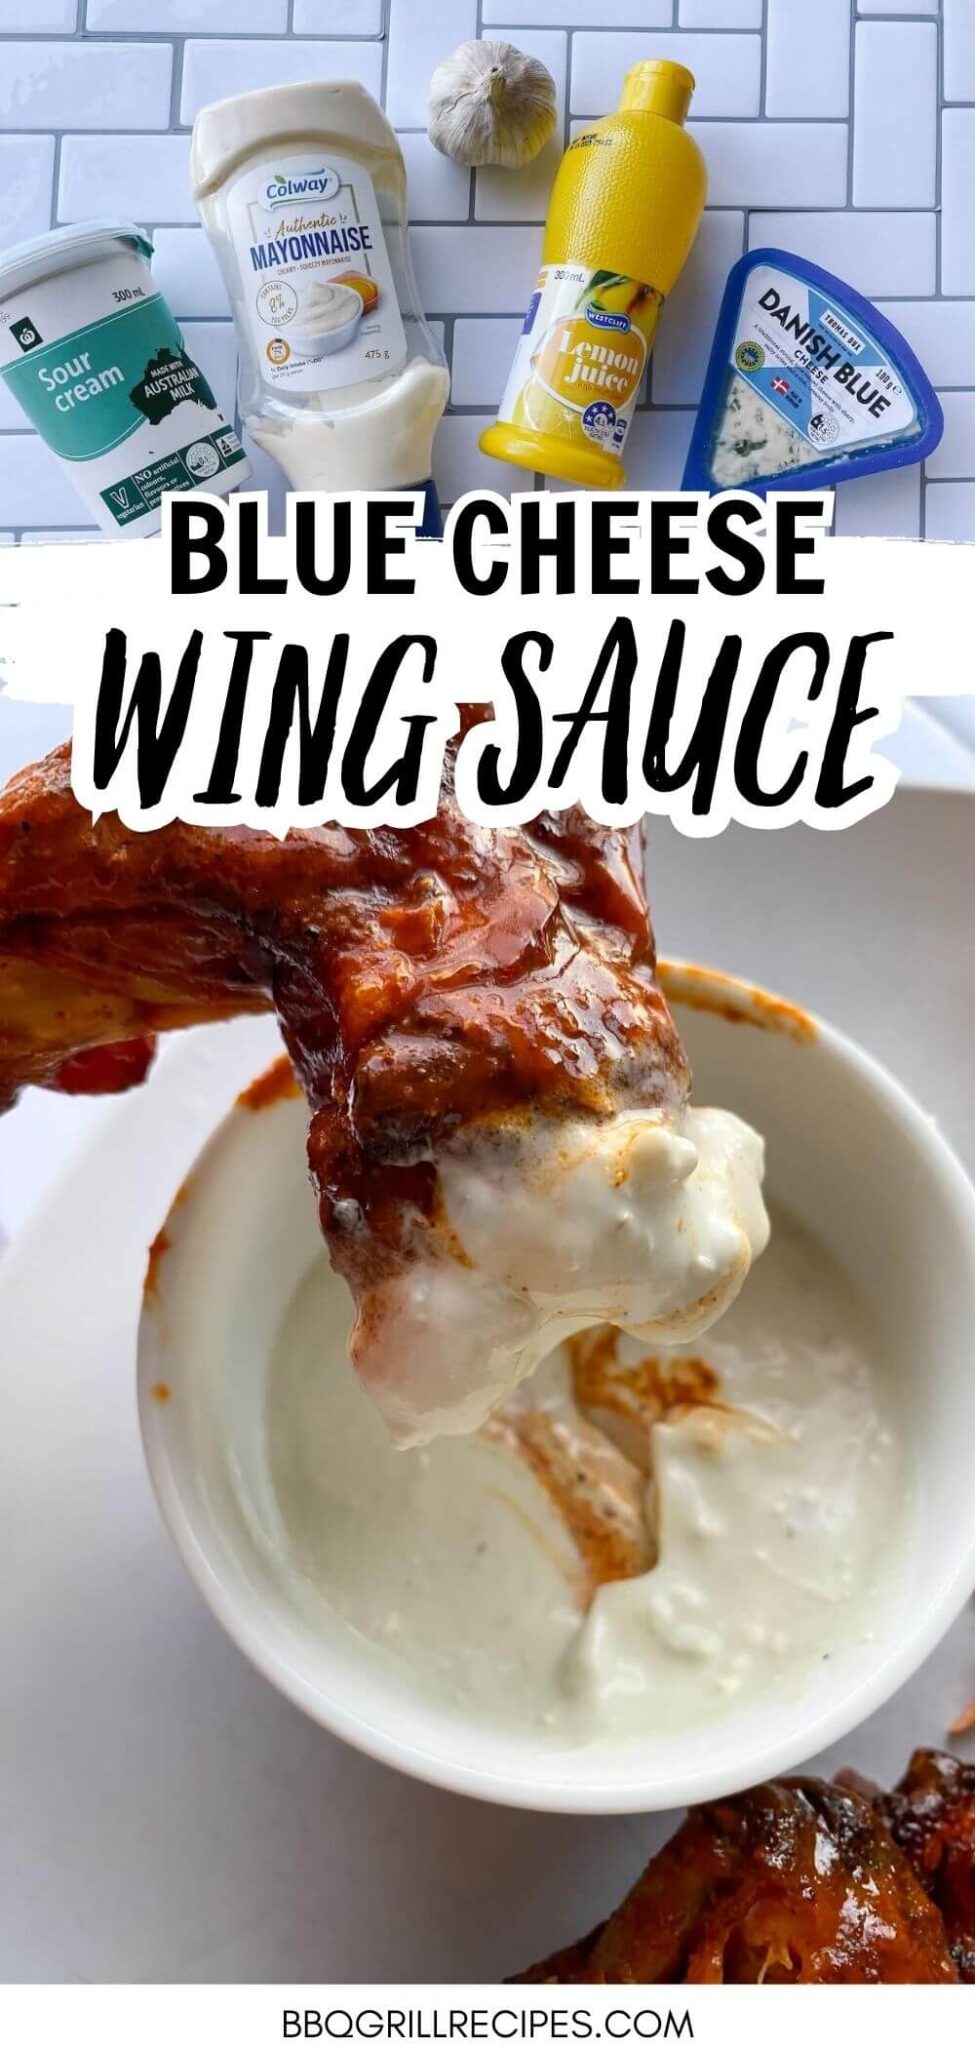 pinterest image - text reads blue cheese wing sauce.